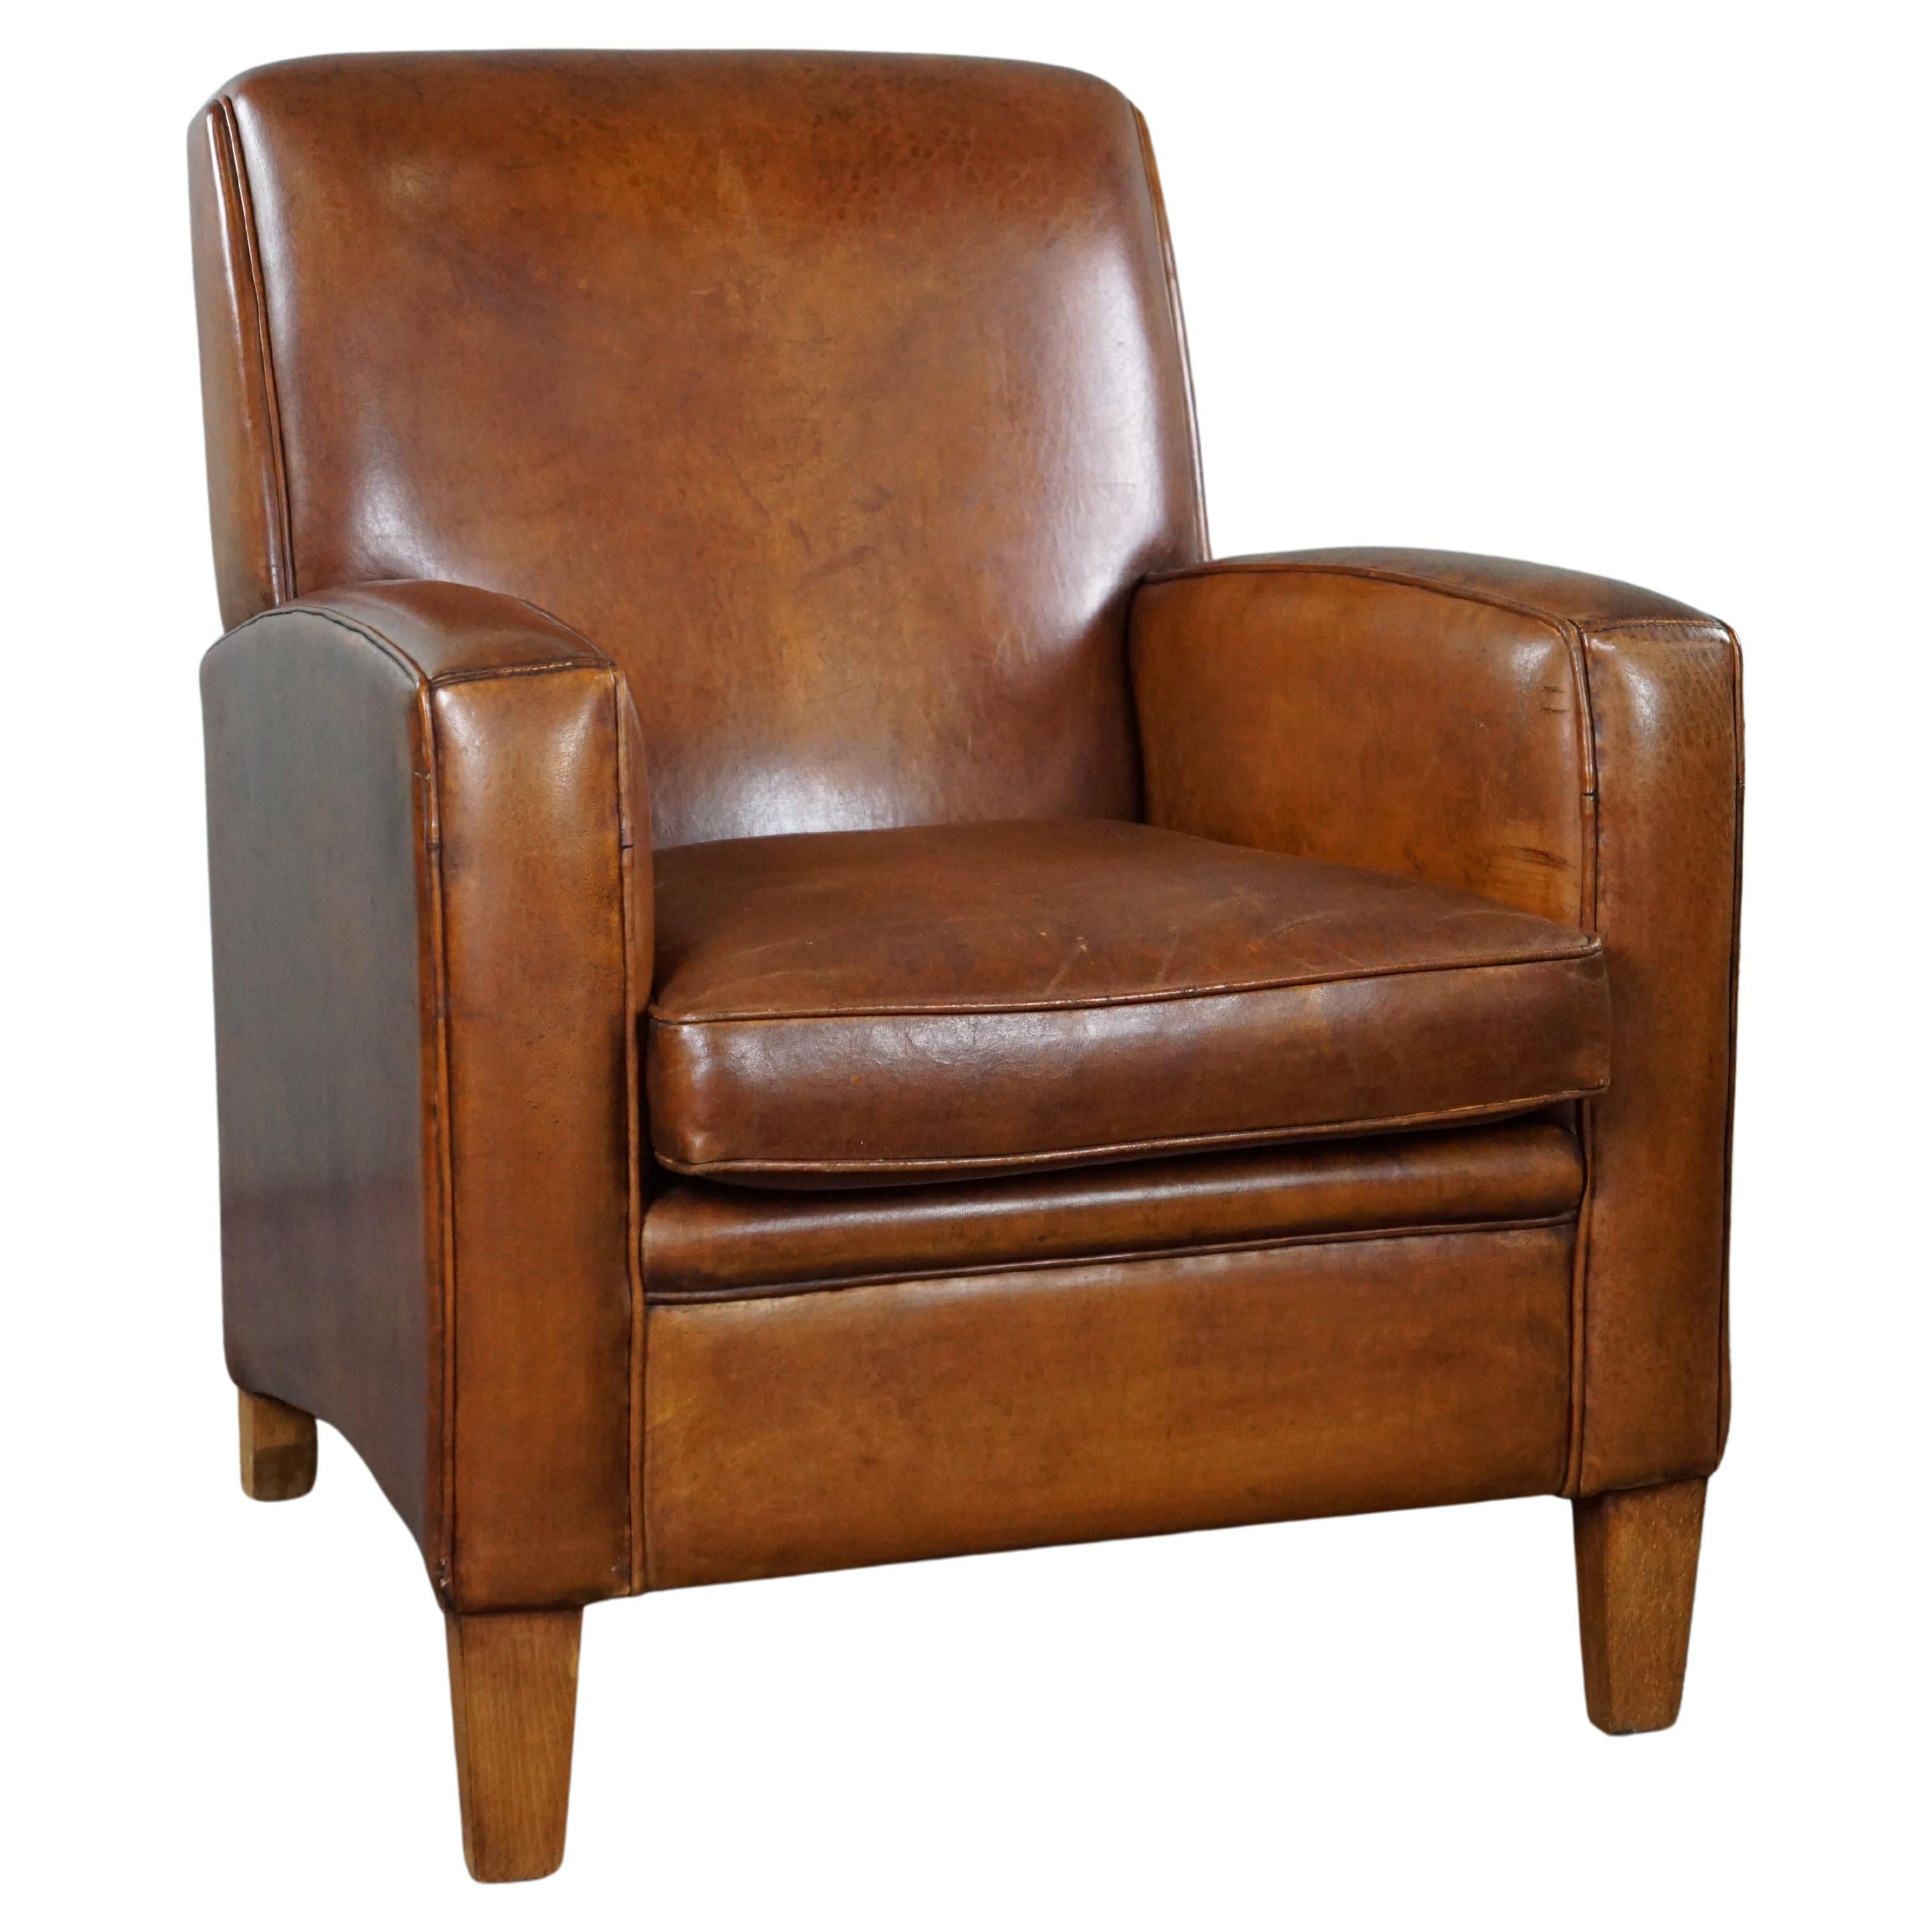 Large cognac-colored sheep leather armchair in good condition with a sleek desig For Sale